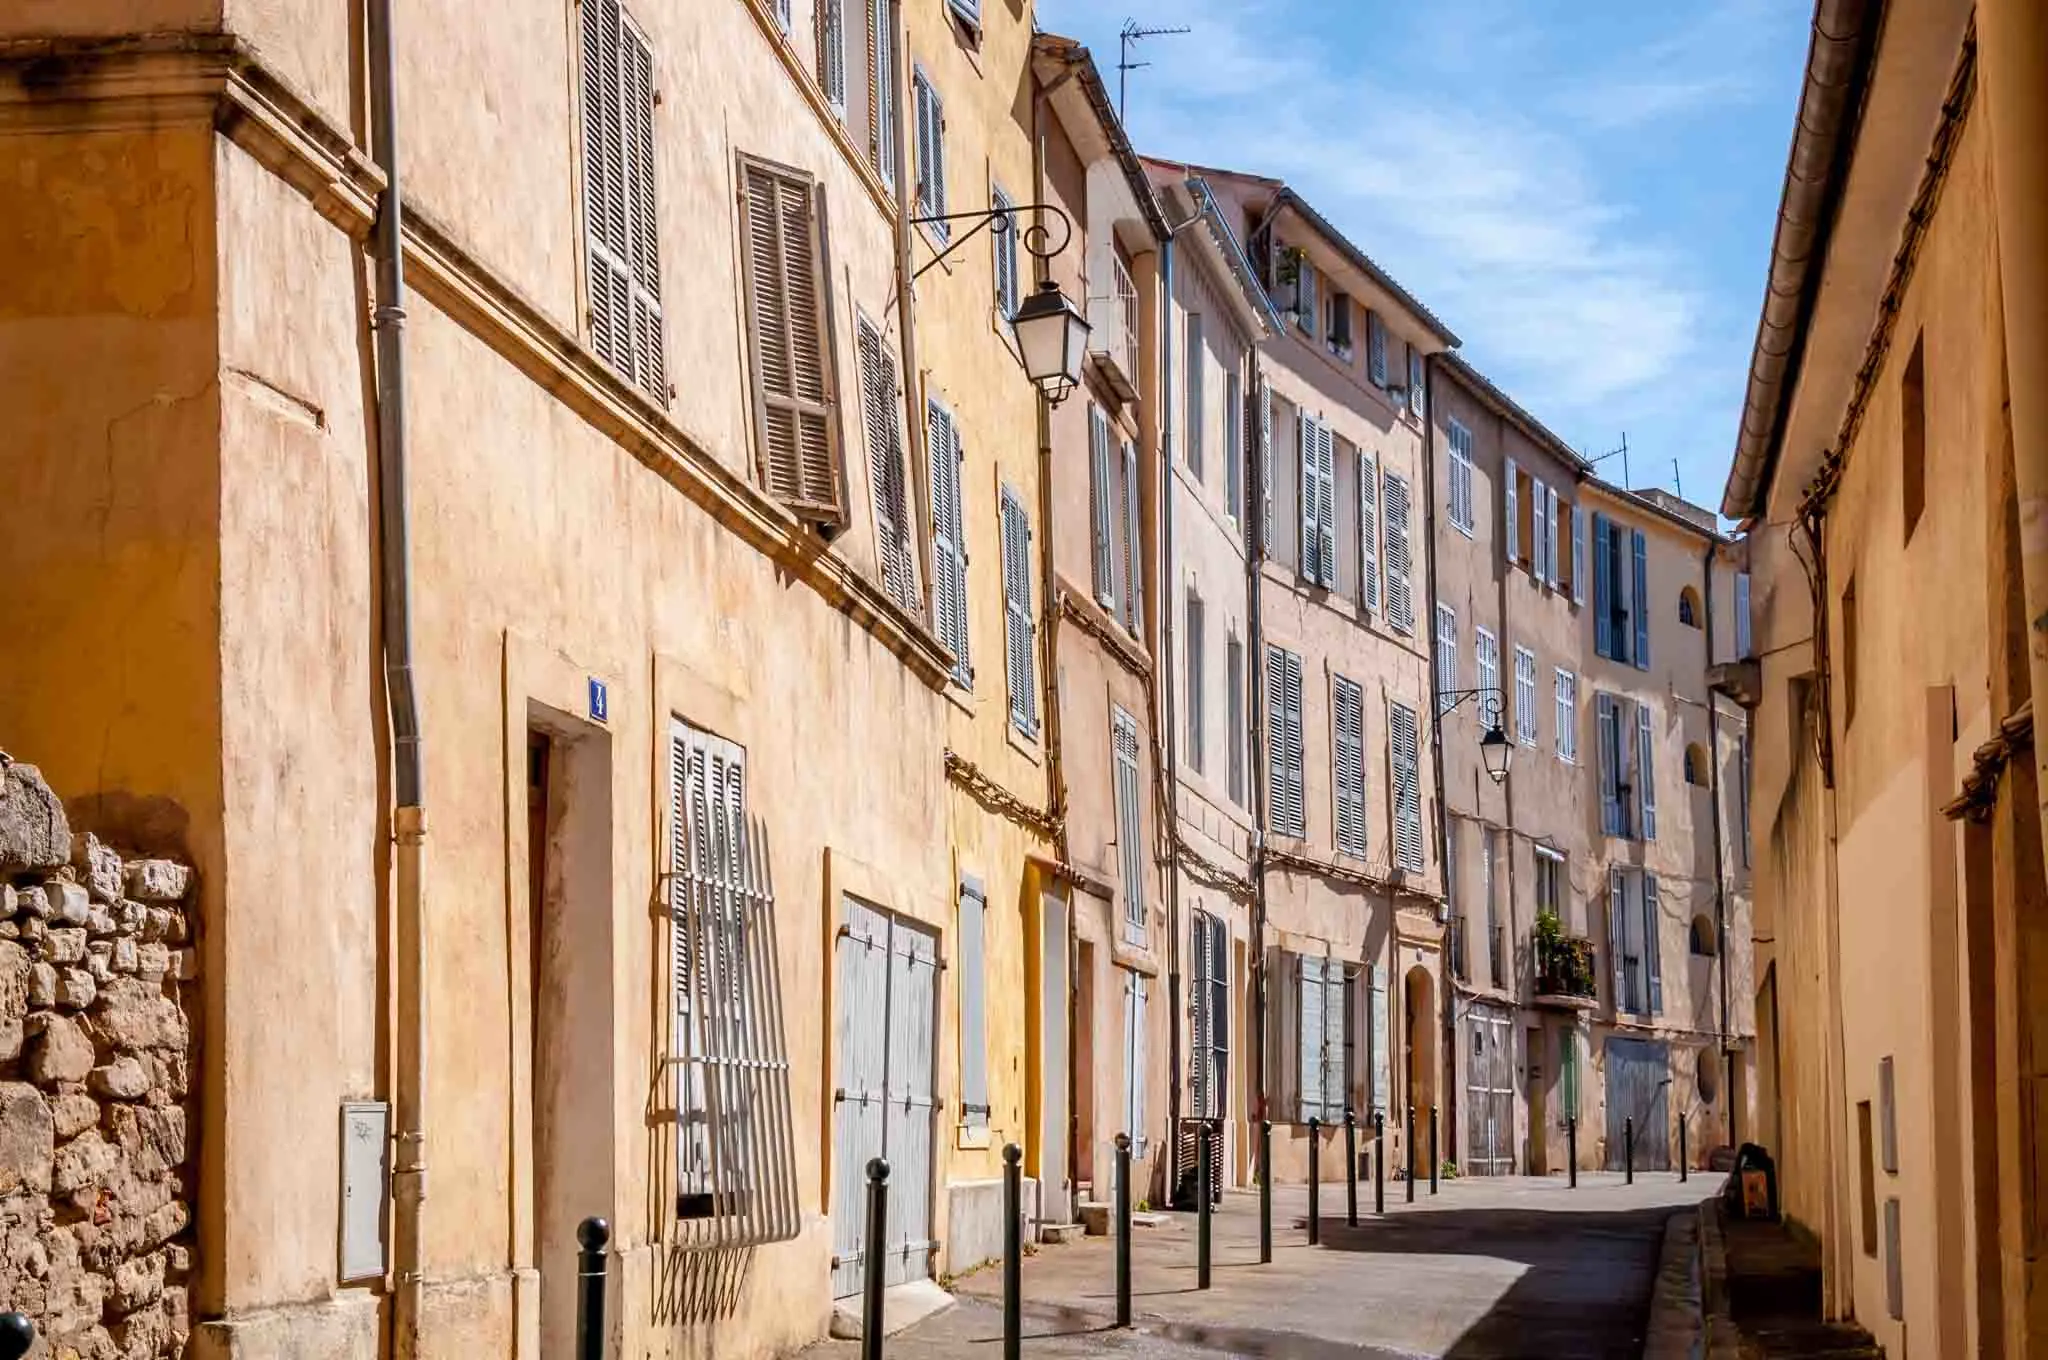 Peach and yellow buildings along a street in Aix-en-Provence France